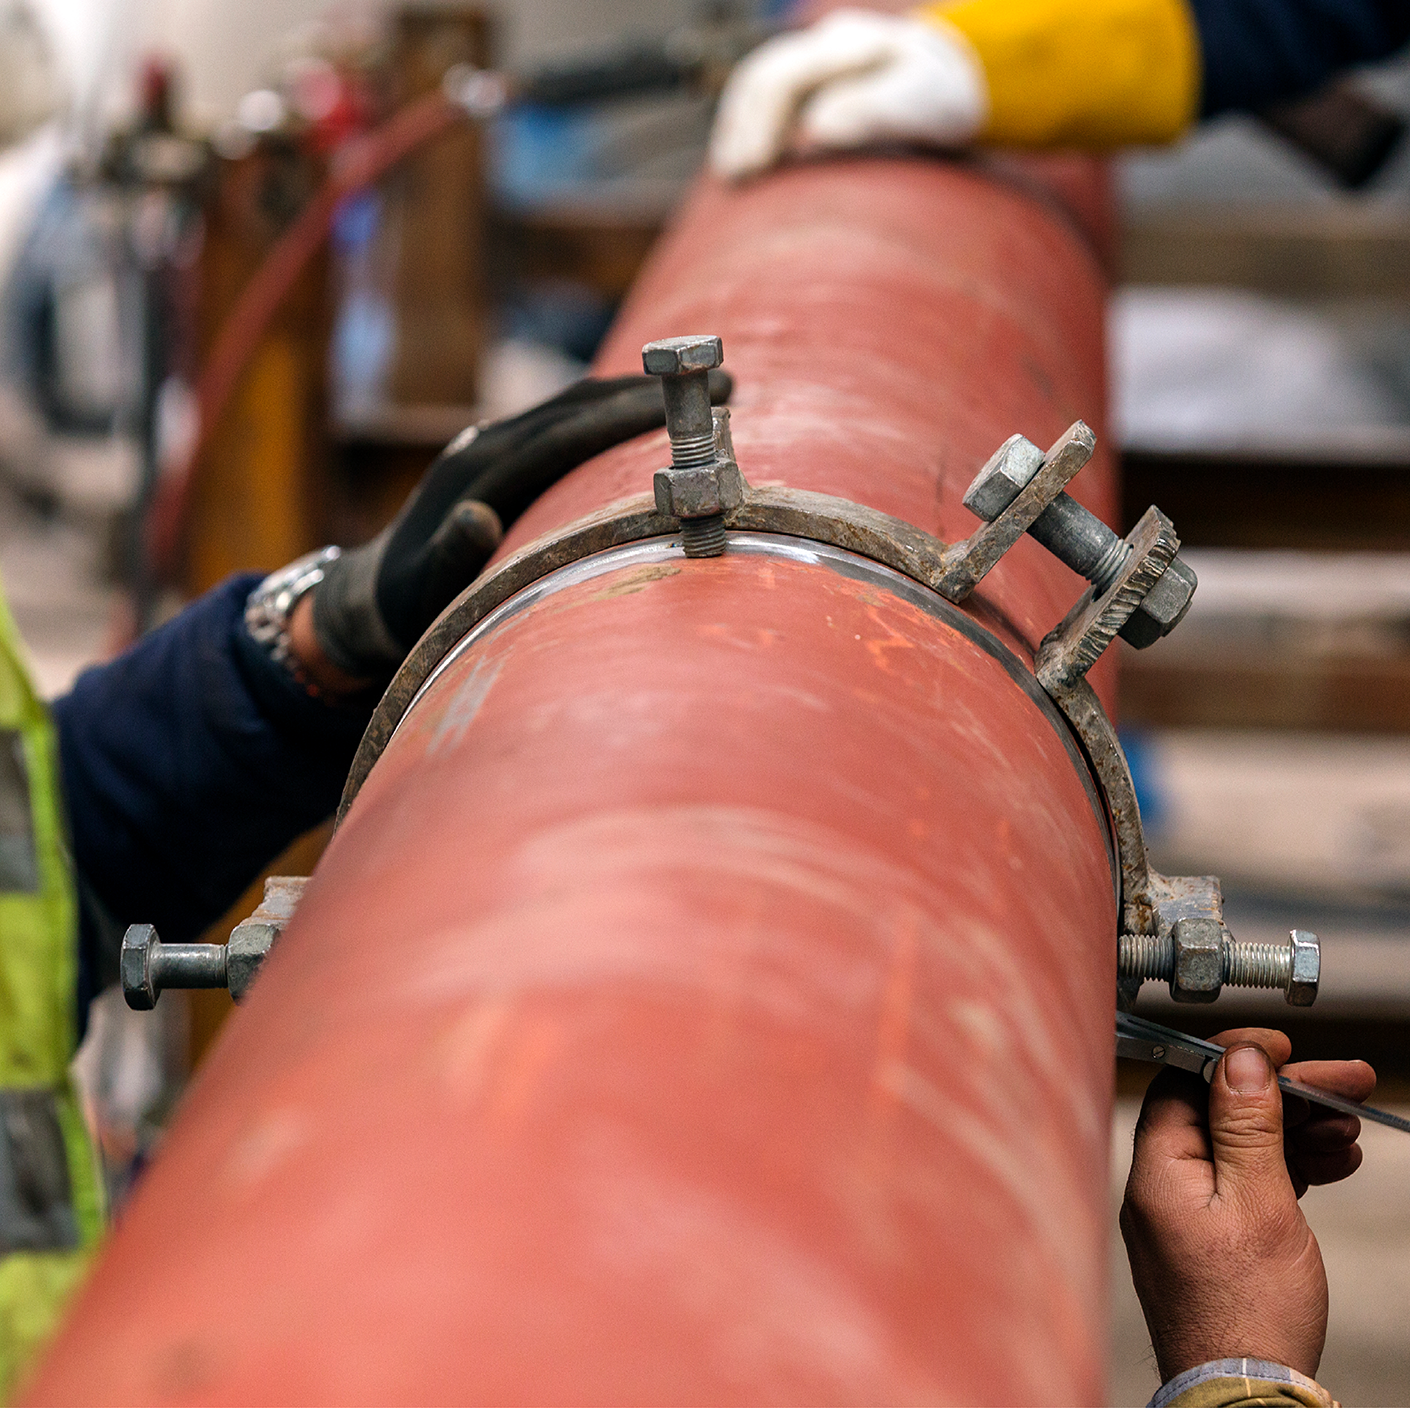 Crews working on a large-diameter natural gas pipe